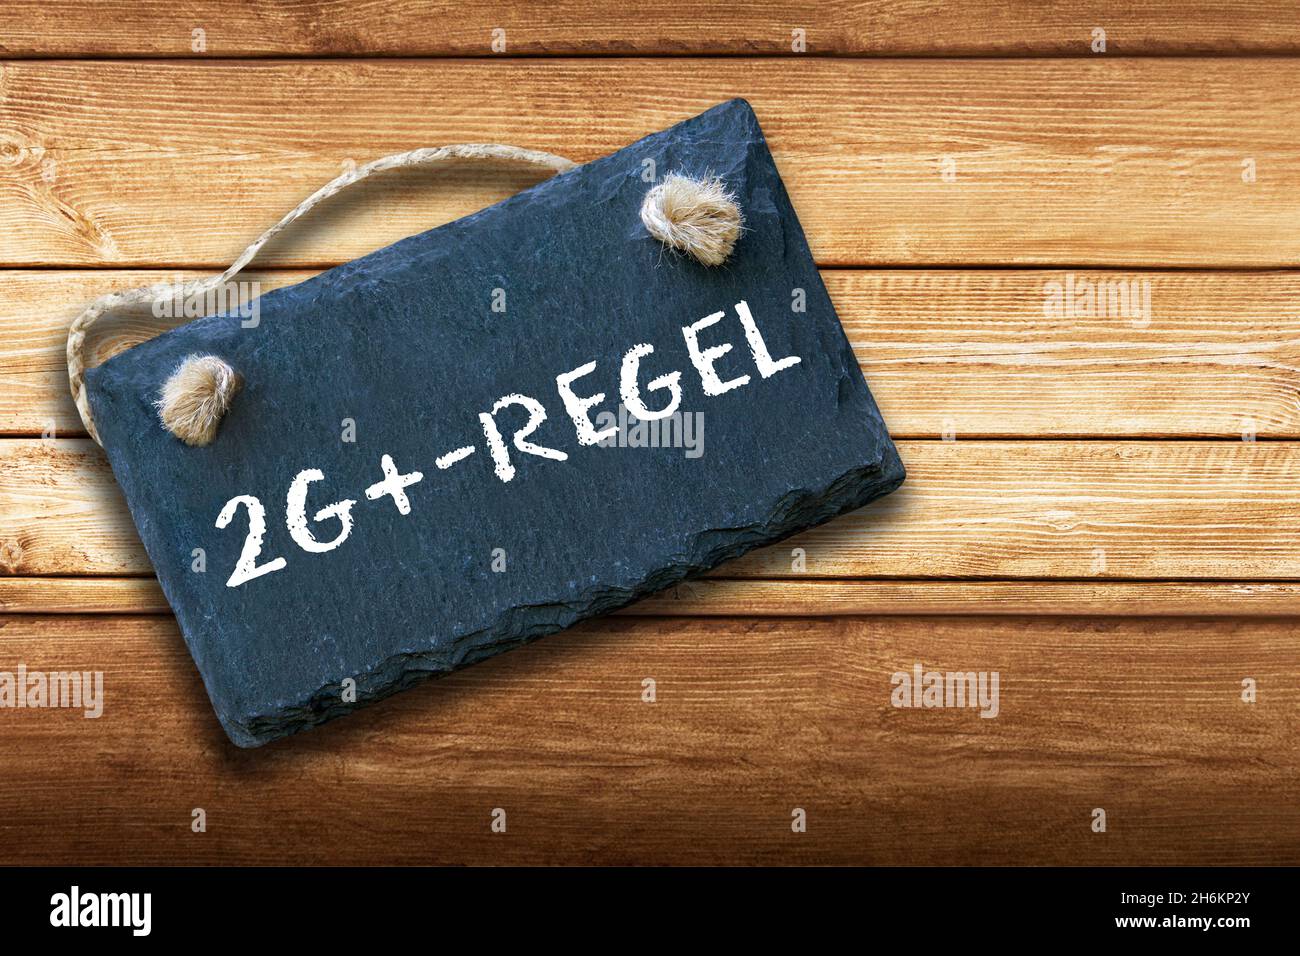 German Corona 2G+ Rule and sign on wooden background Stock Photo